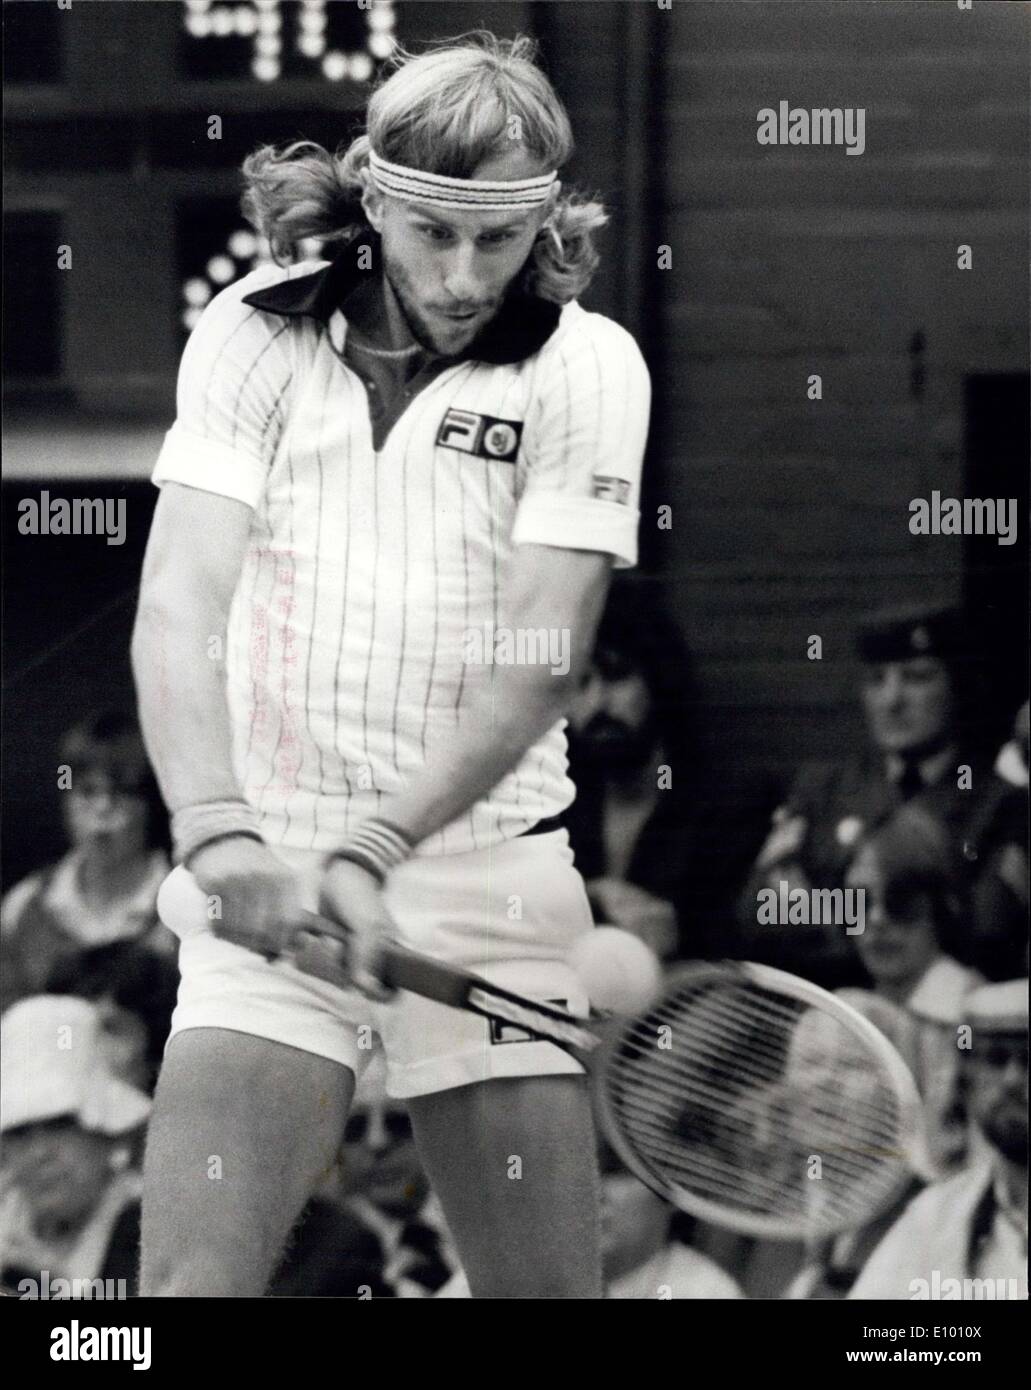 Feb. 09, 1972 - Bjorn Borg Wins Wimbledon for the Fourth Time in a Row. Today on the Centre Court at Wimbledon, Bjorn Borg of Sweden, won the Men's Single title for the fourth successive times when beating the American Roscoe Tanner in five sets. Photo Shows: Bjorn Borg seen in action against Roscoe Tanner on the Centre Court. Stock Photo